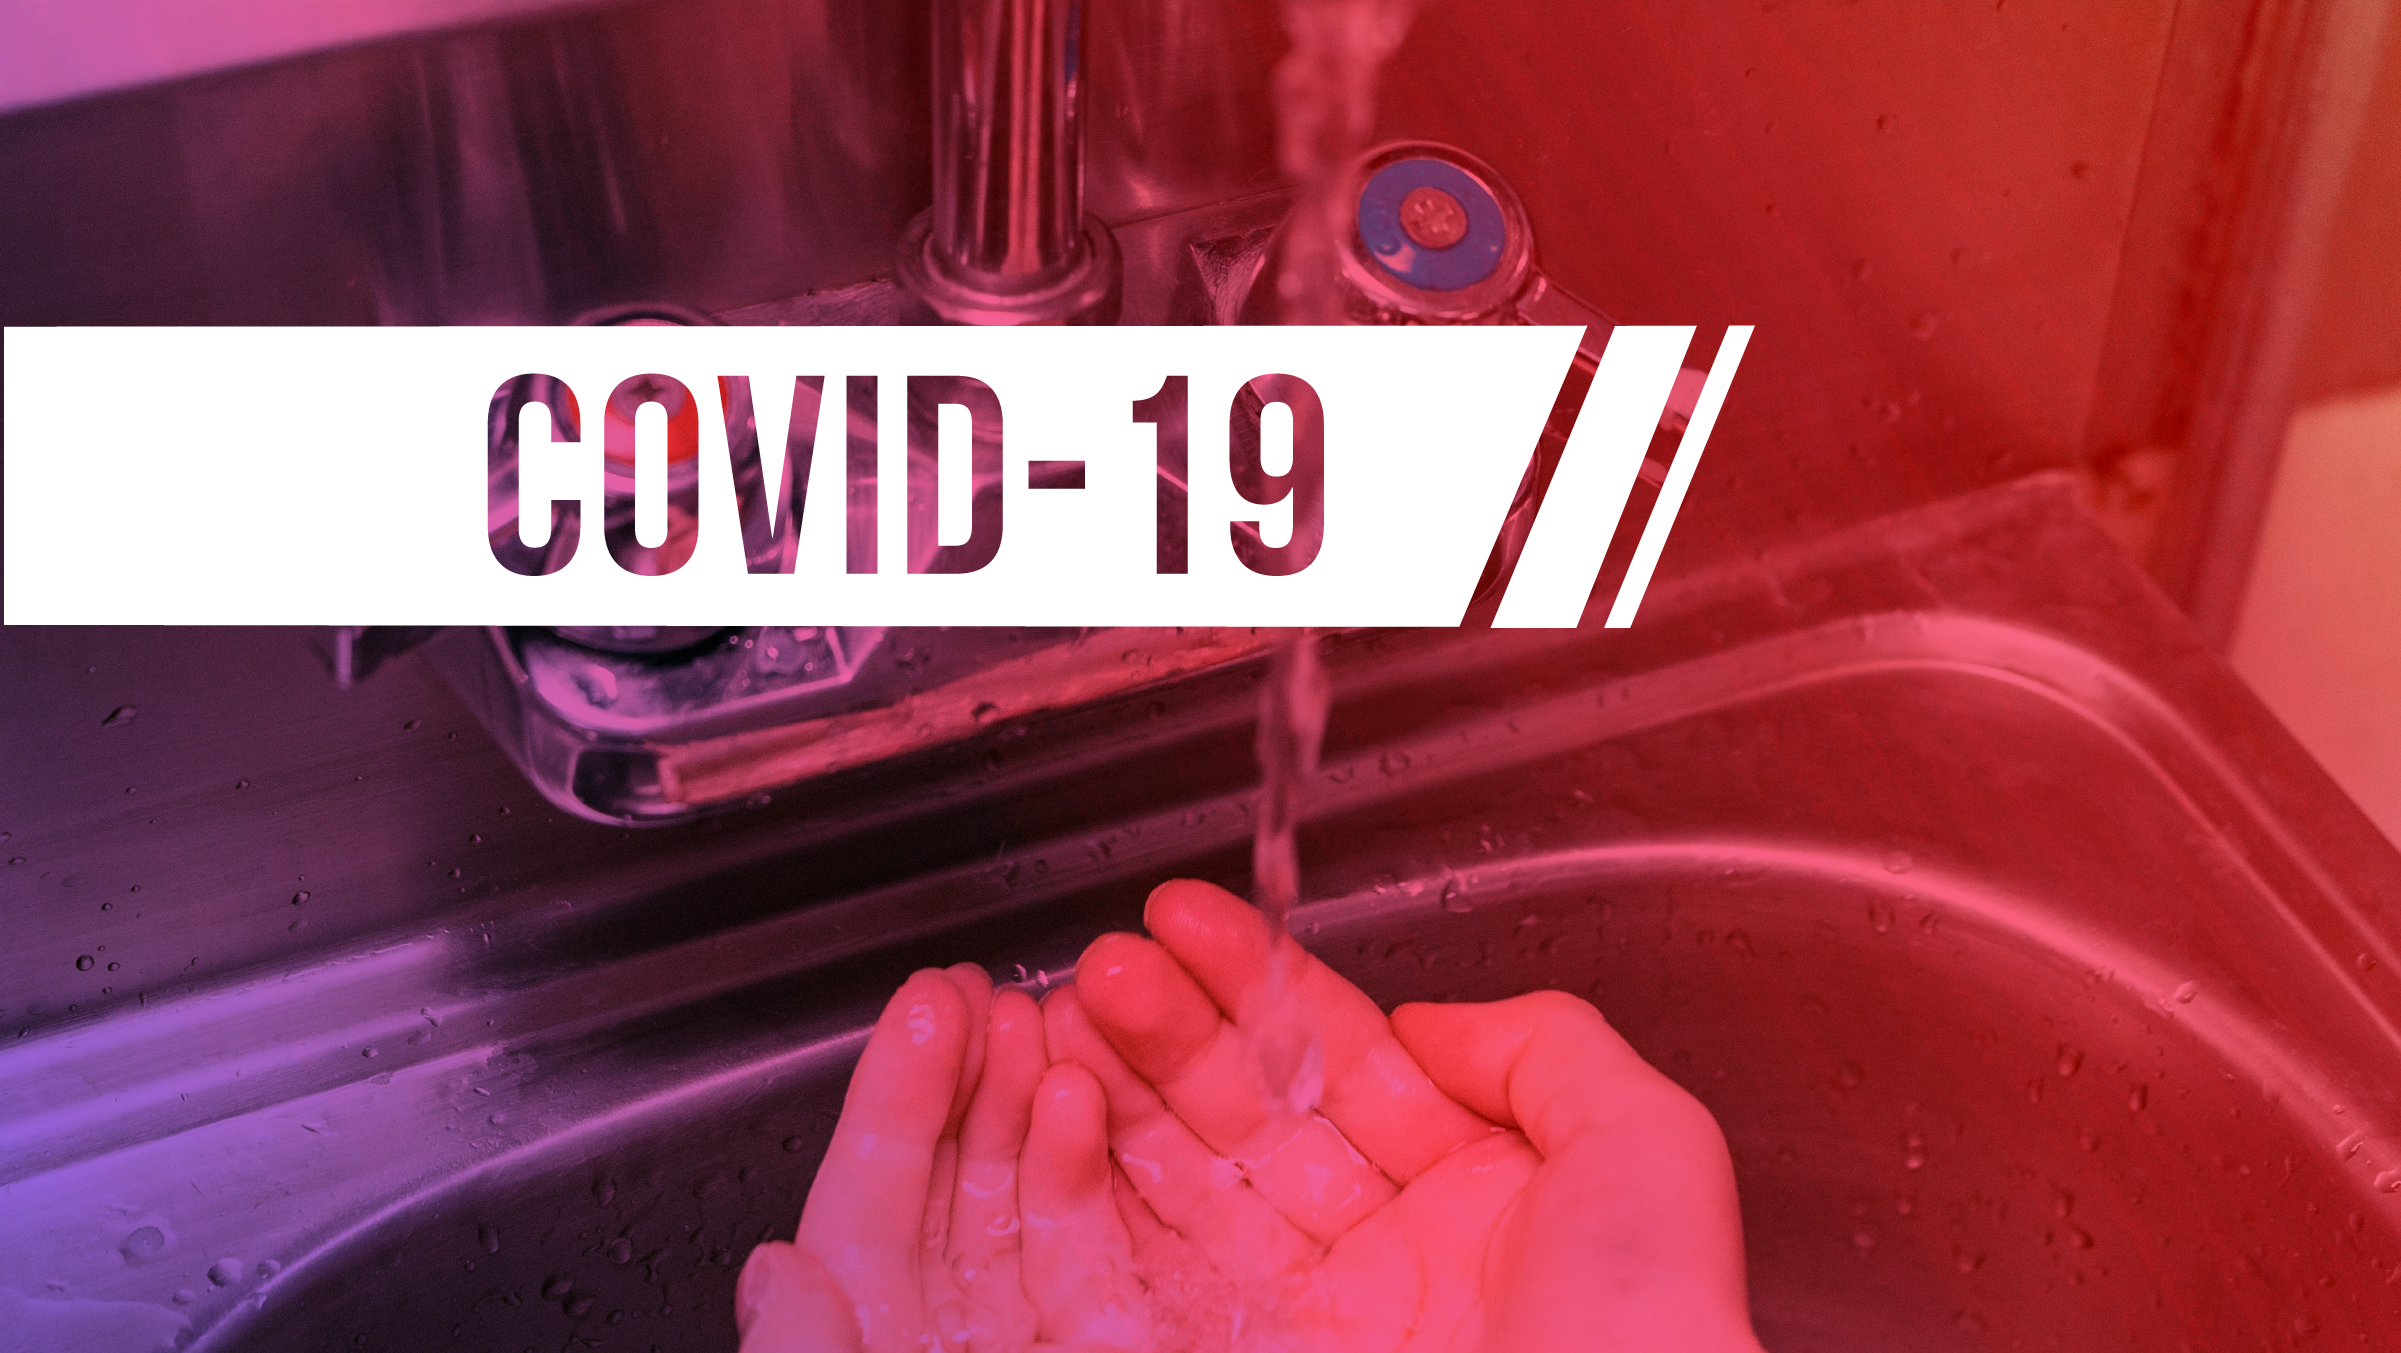 Image of hands washing in a sink, with words "COVID-19."